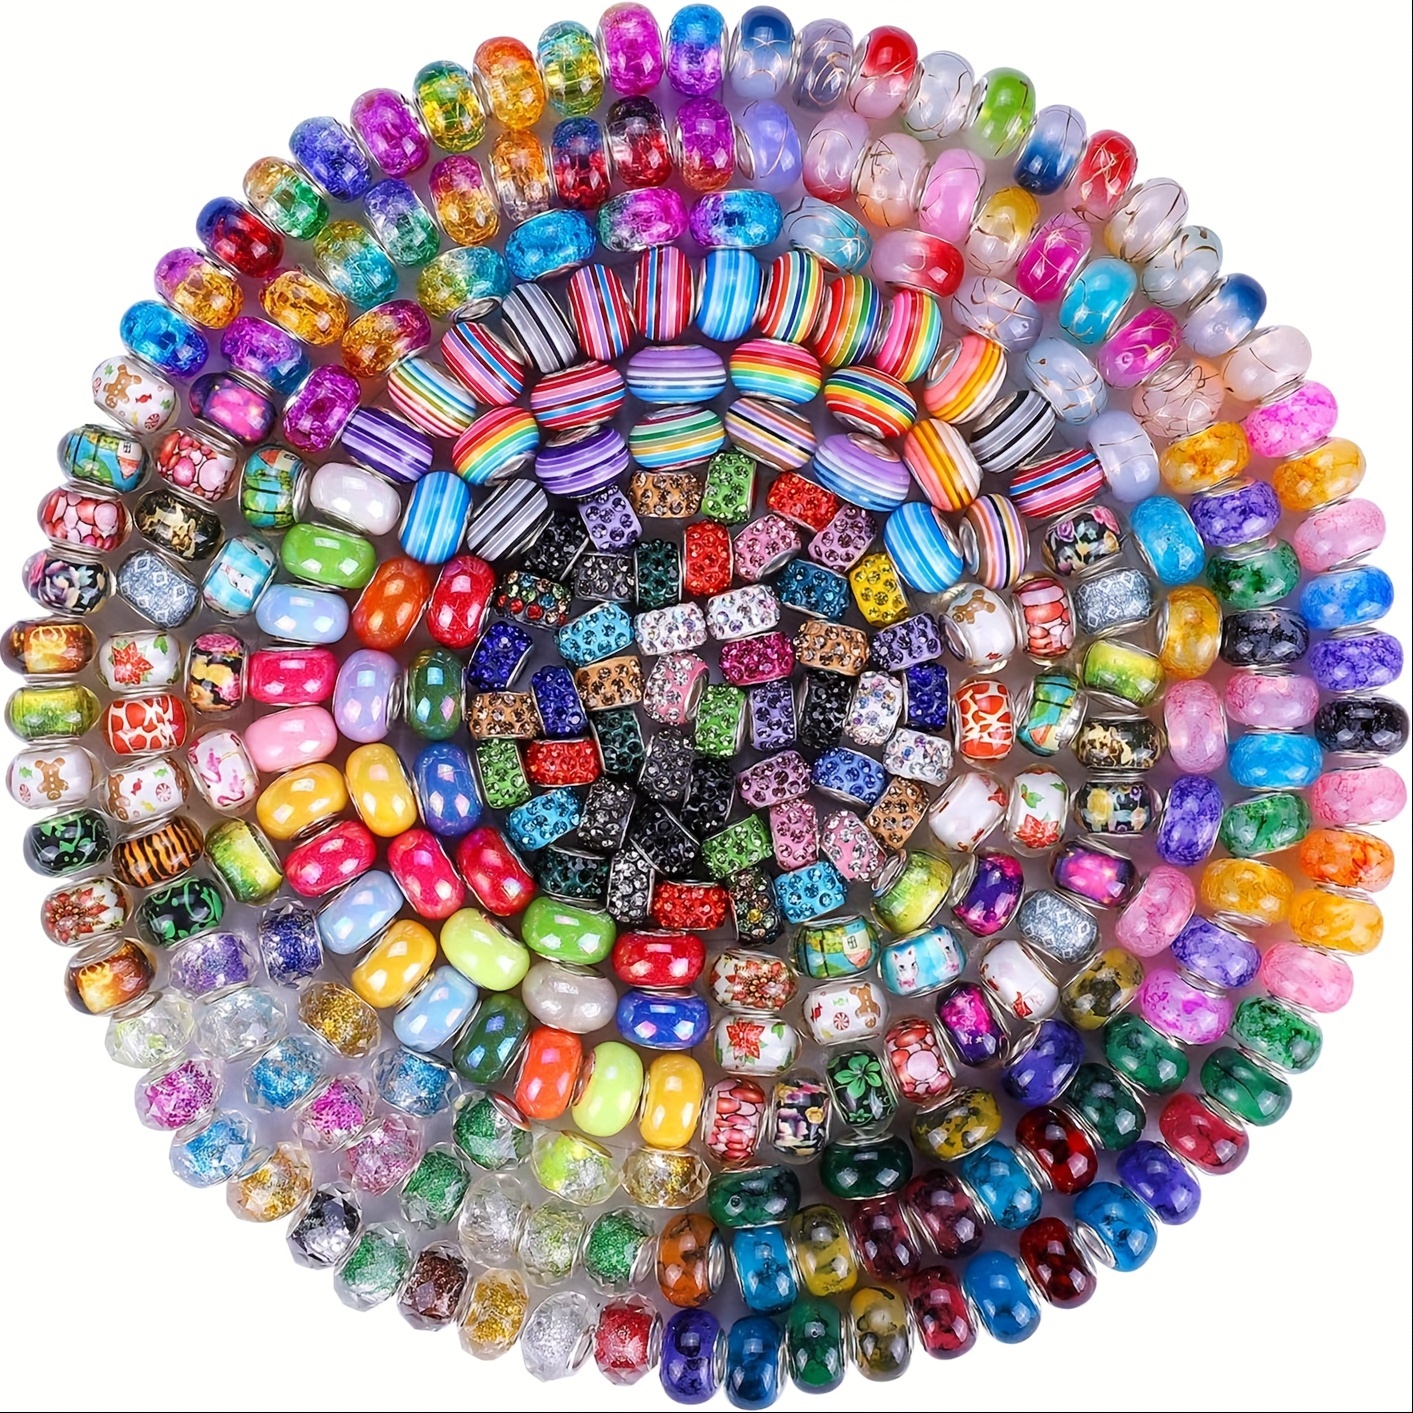 

50pcs Mixed Colorful Large Hole Spacer Charm Fairy Wands Rhinestone Craft Beads For Jewelry Making Diy Bracelet Necklace Handmade Beaded Craft Supplies